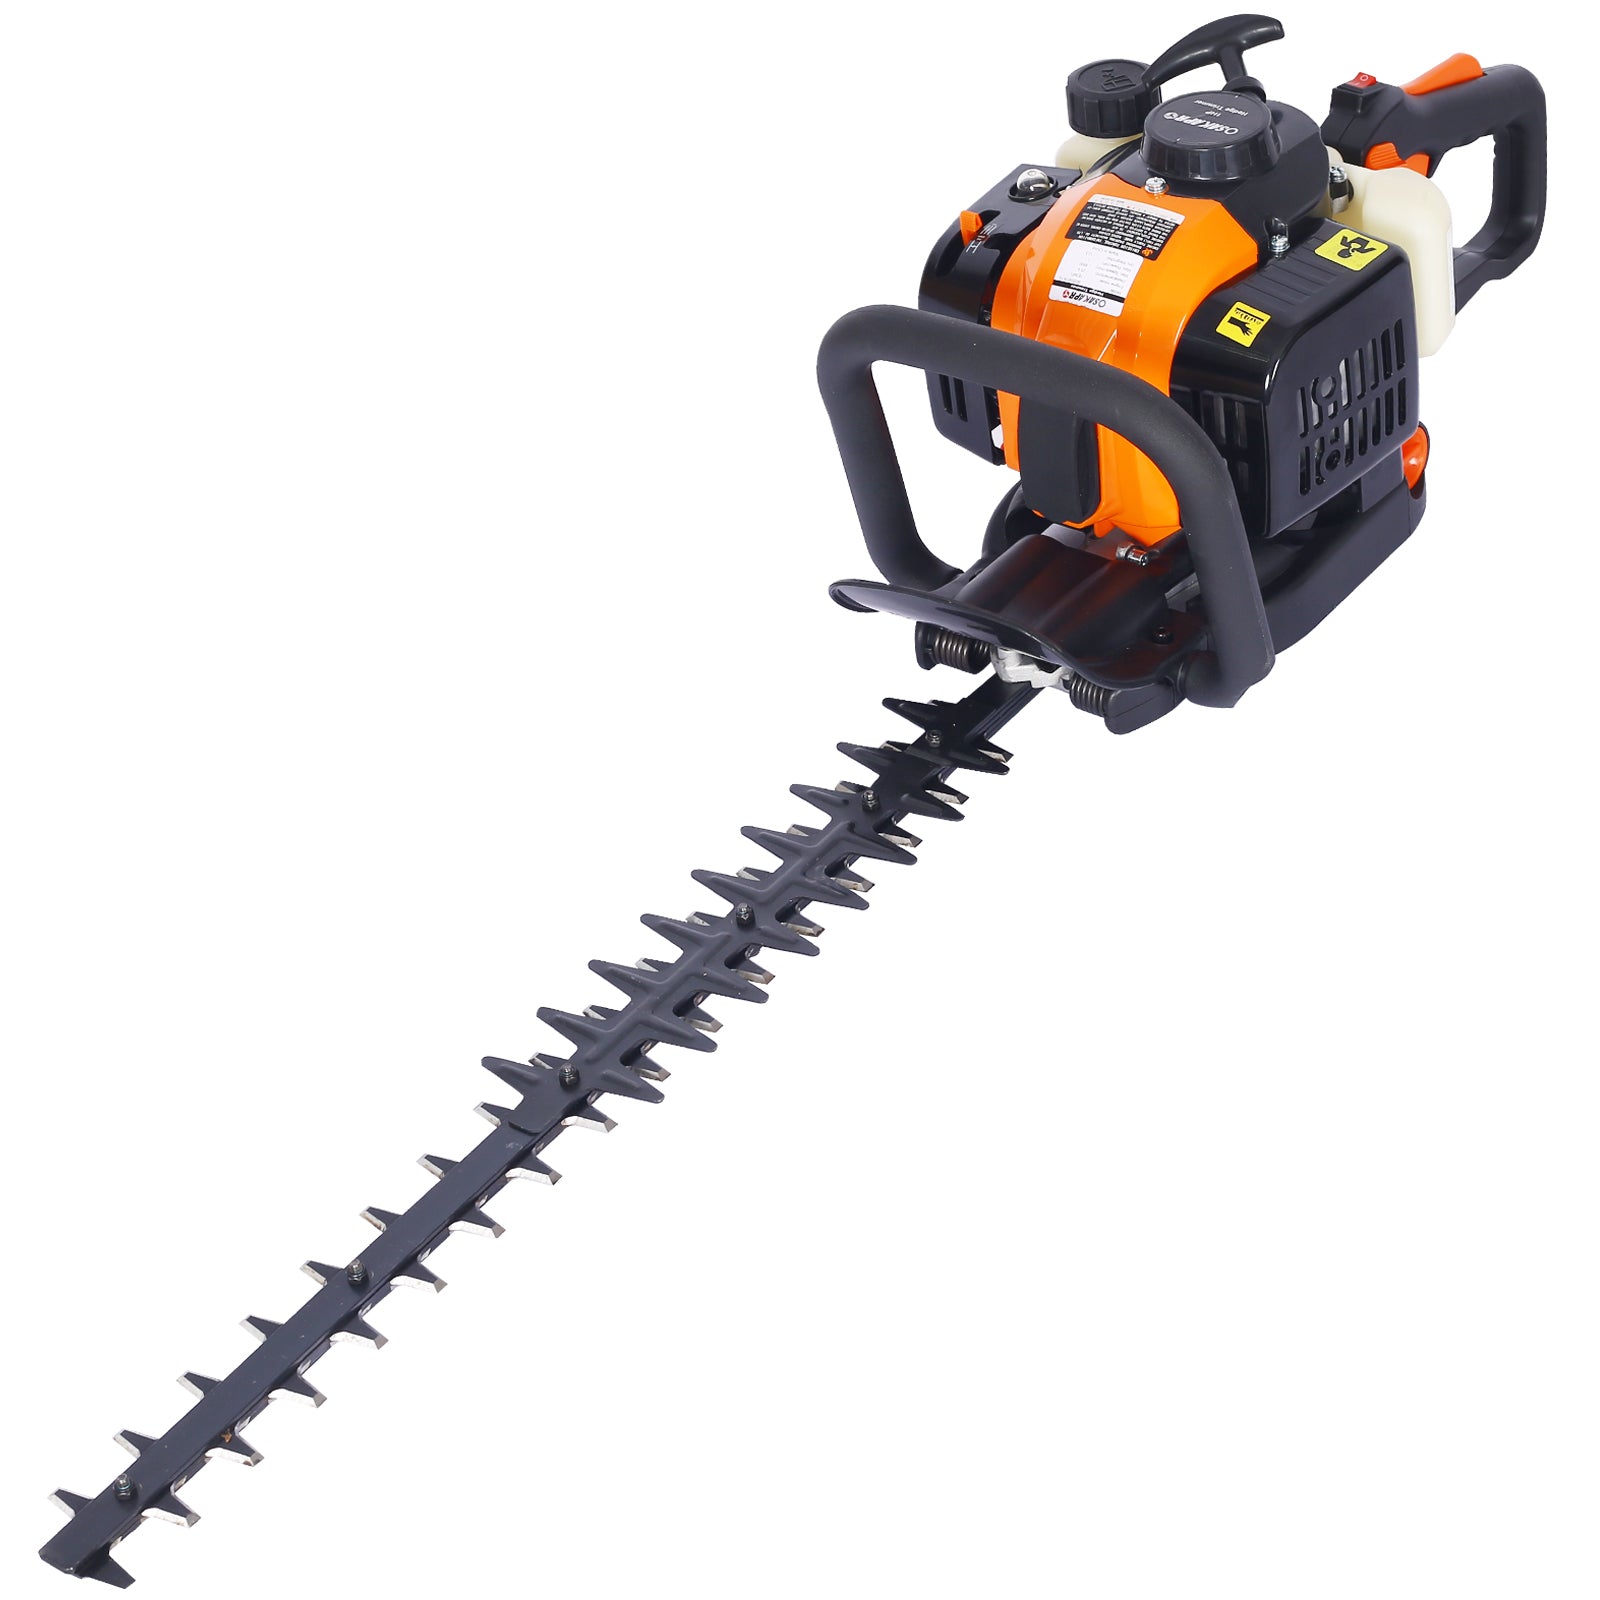 26cc 2 cycle gas powered hedge trimmer , double